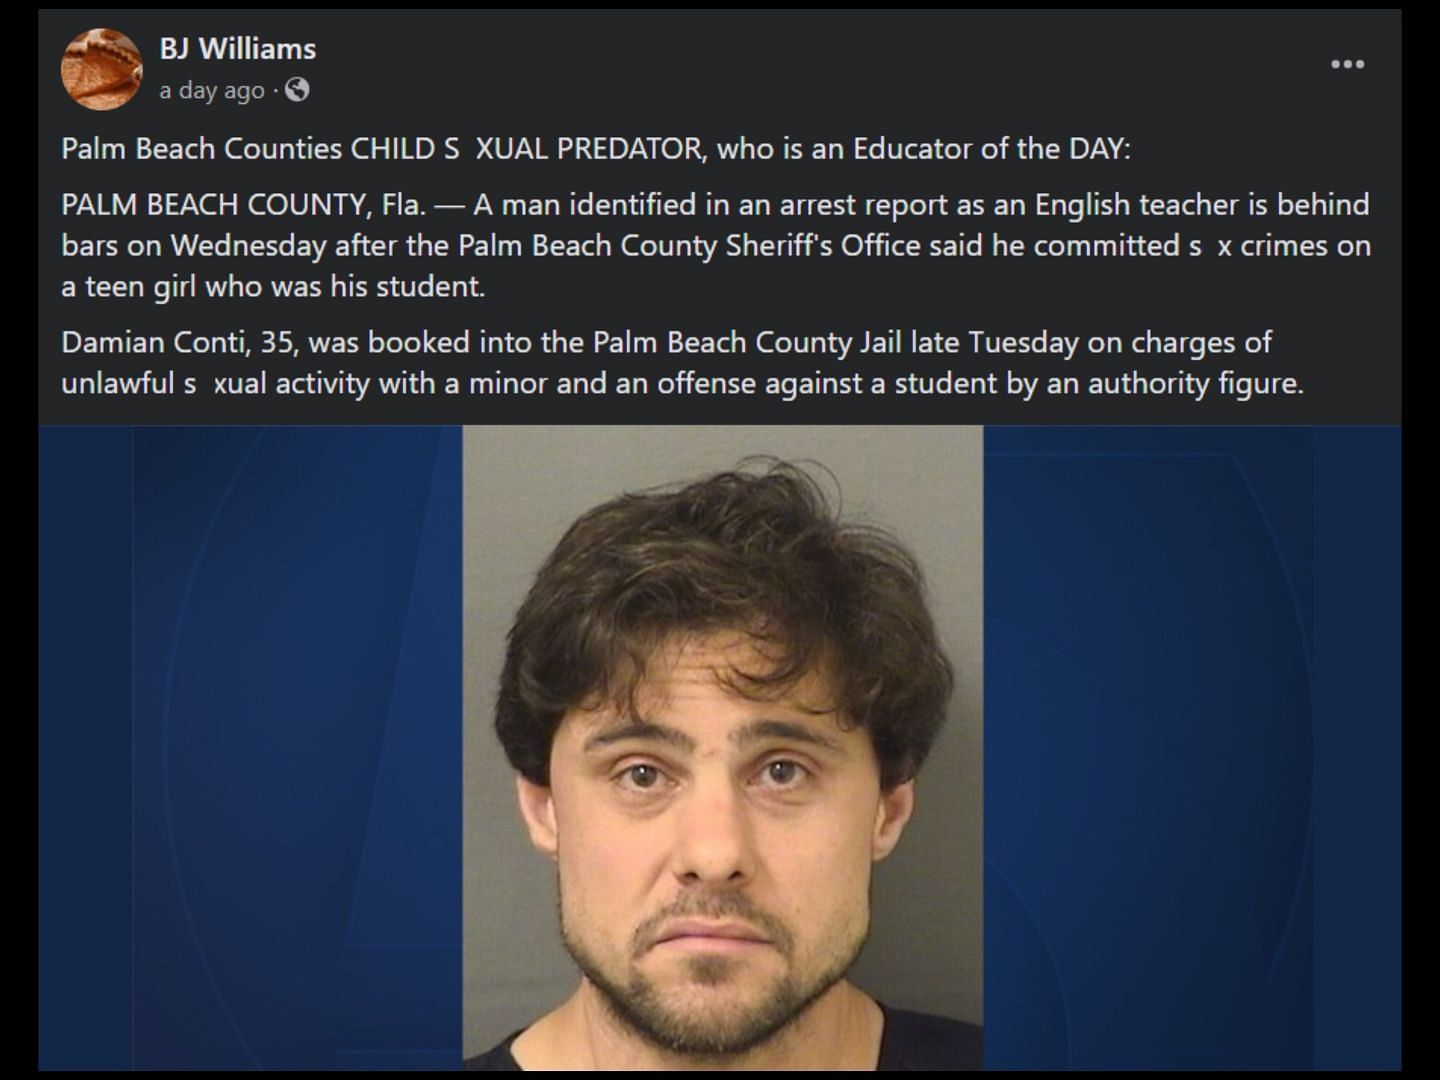 South Florida high school teacher Damian Conti was arrested for improper s*xual relationship with a minor. (Image via Facebook/BJ Williams)